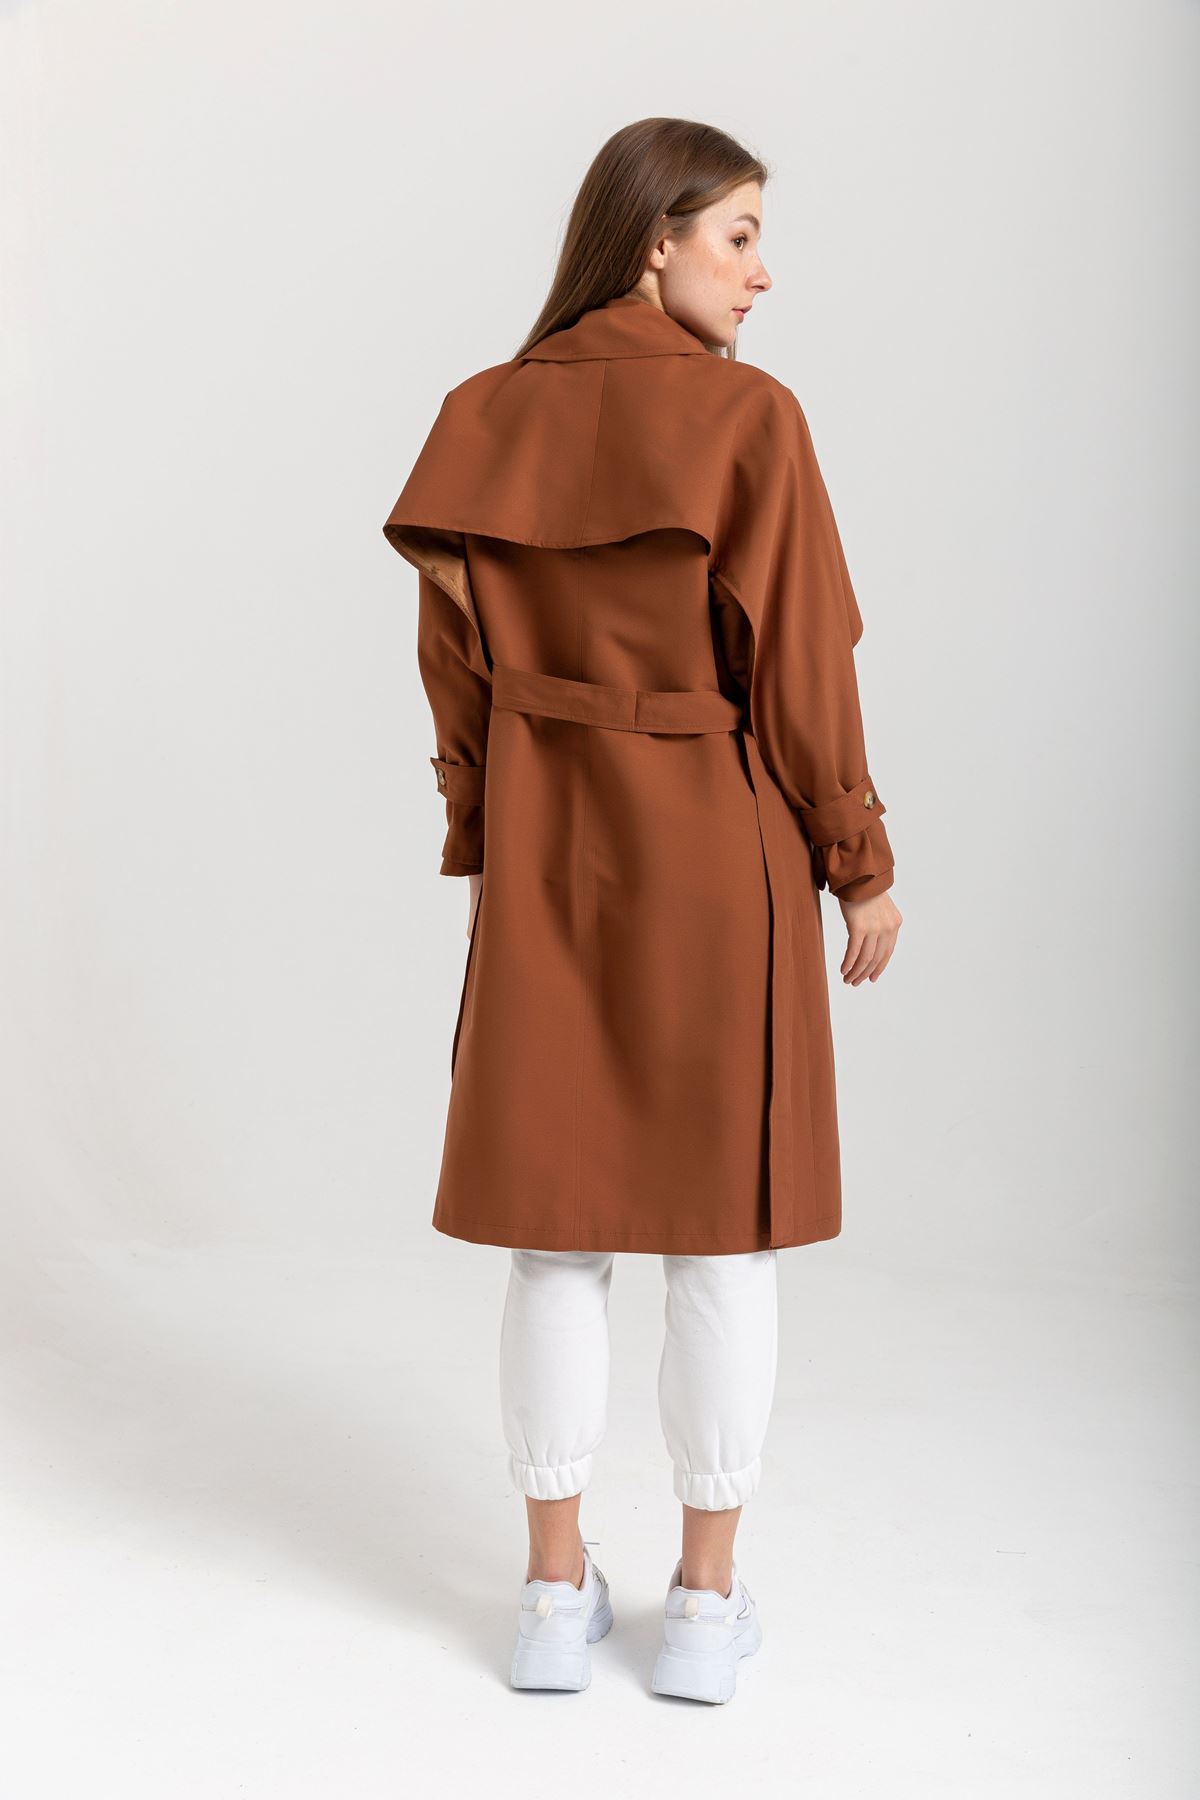 Soft Fabric Long Sleeve Shirt Collar Women Trench Coat With Belt - Brown